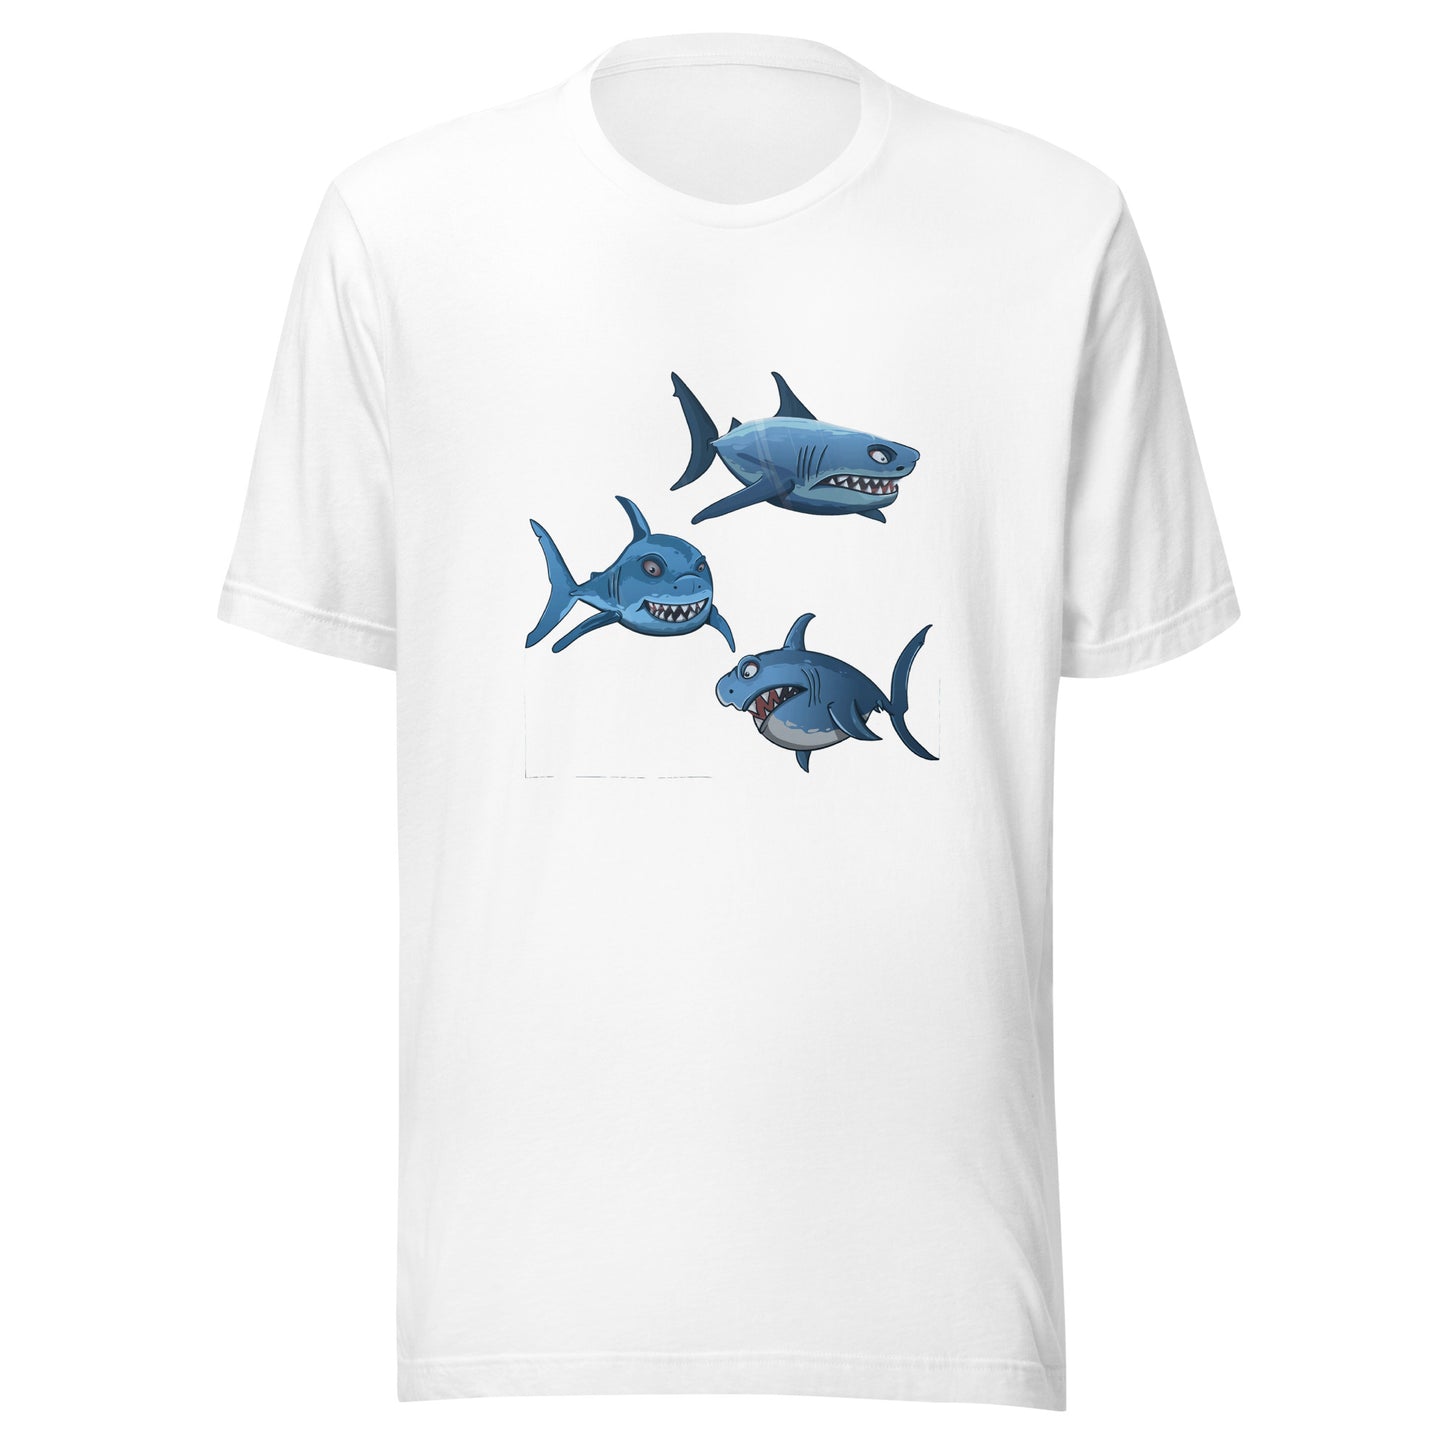 Women and Men's (Unisex) T-Shirt Printed with Sharks